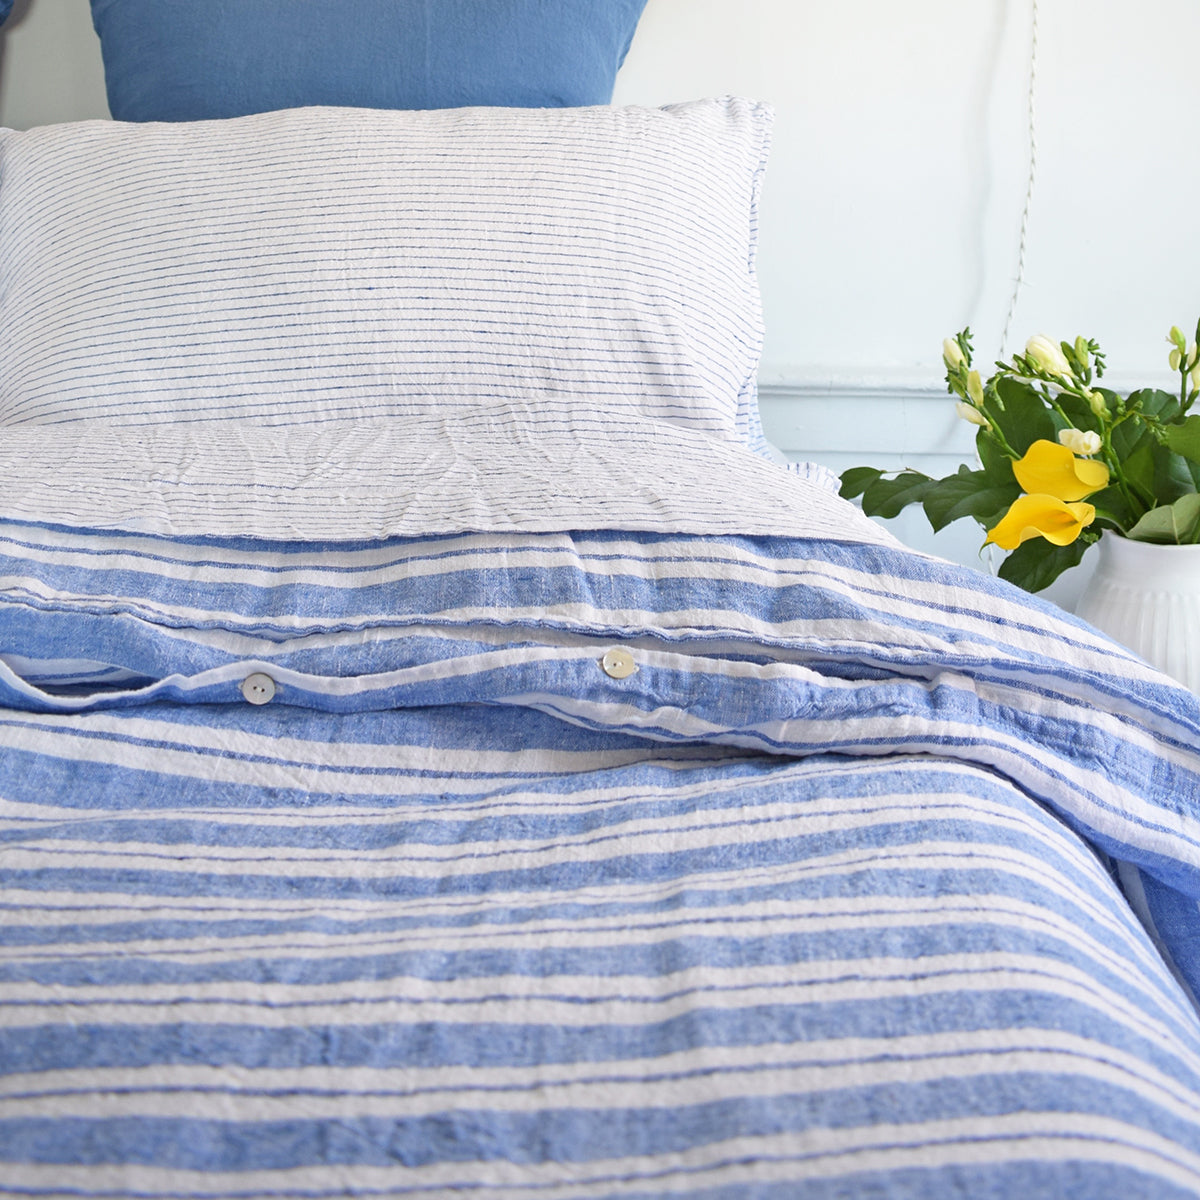 A Linge Particulier Linen Duvet in Large Blue Stripes gives a blue and white stripe color to this duvet for a colorful patterned and printed linen bedding look from Collyer&#39;s Mansion